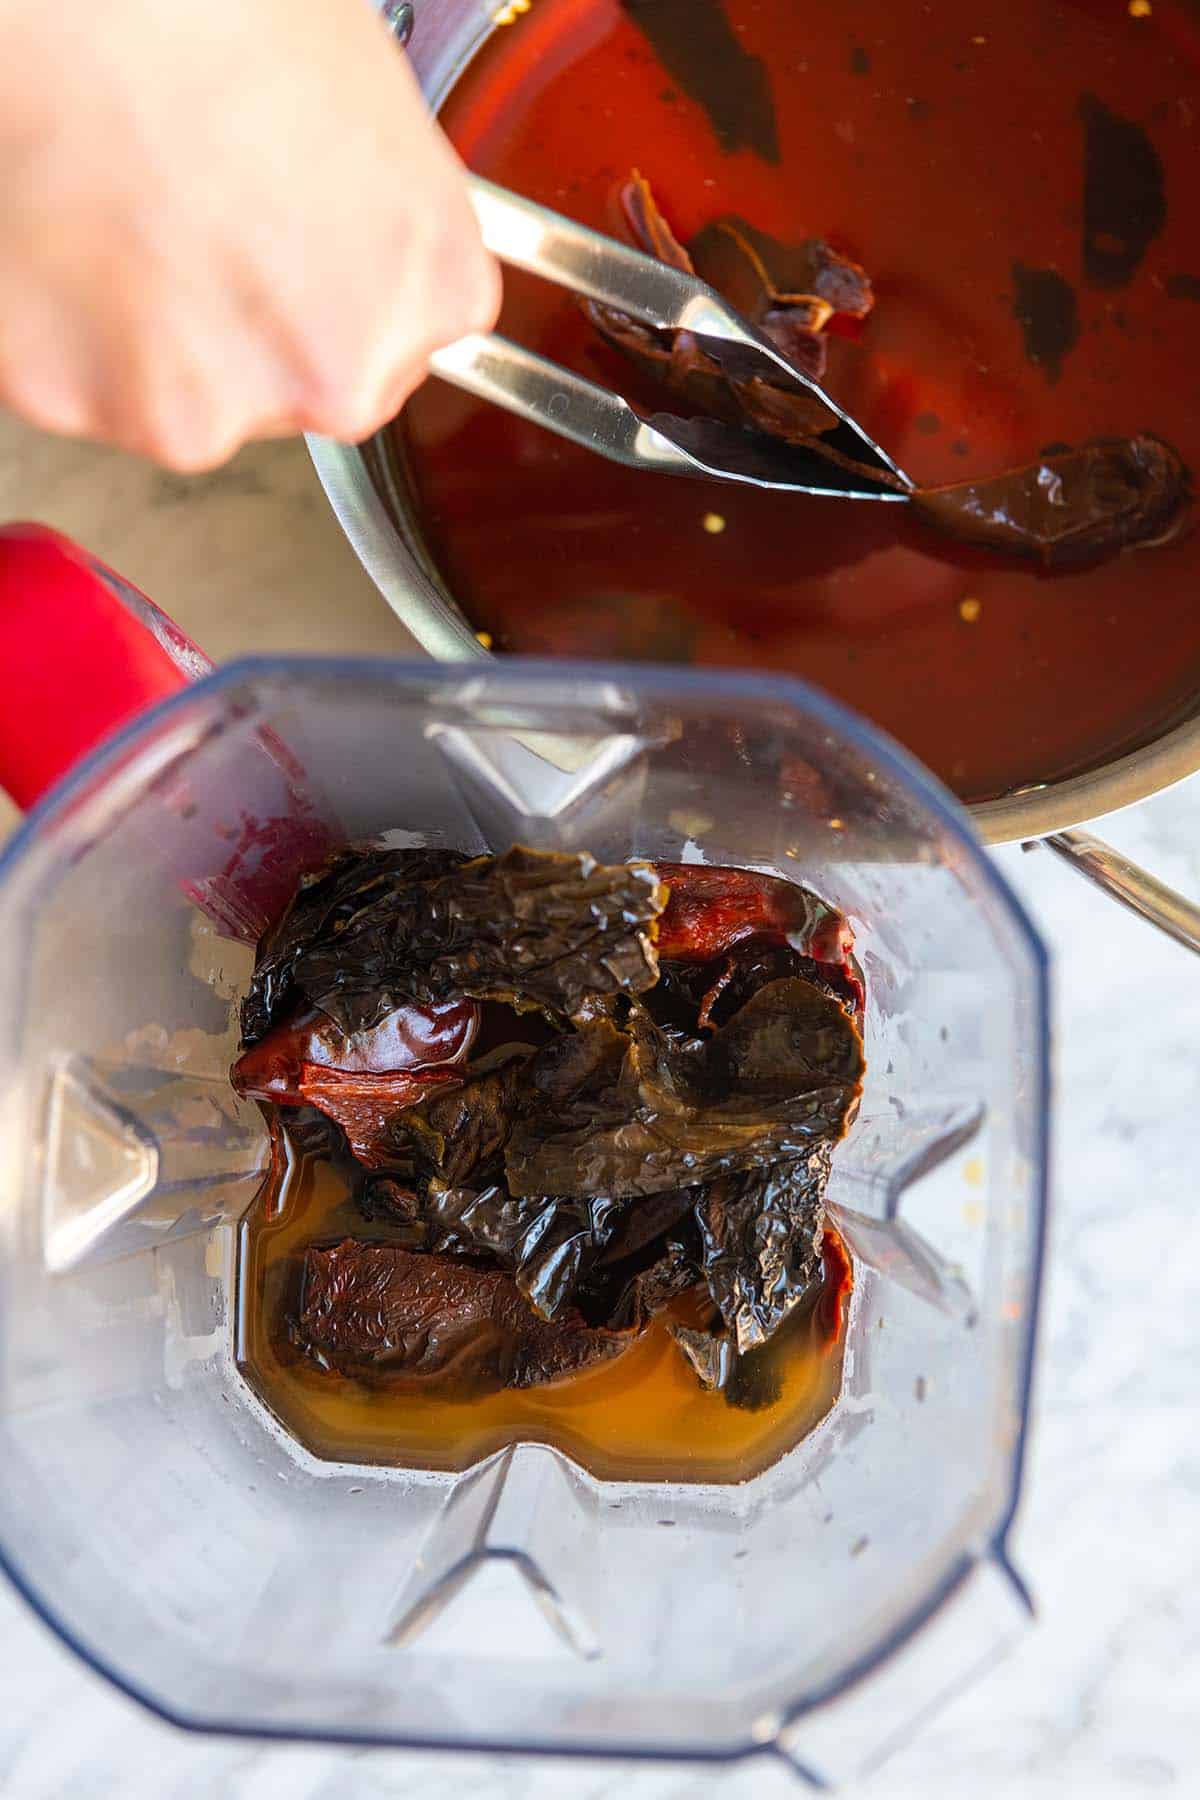 Blending softened dried chile peppers into a chili paste